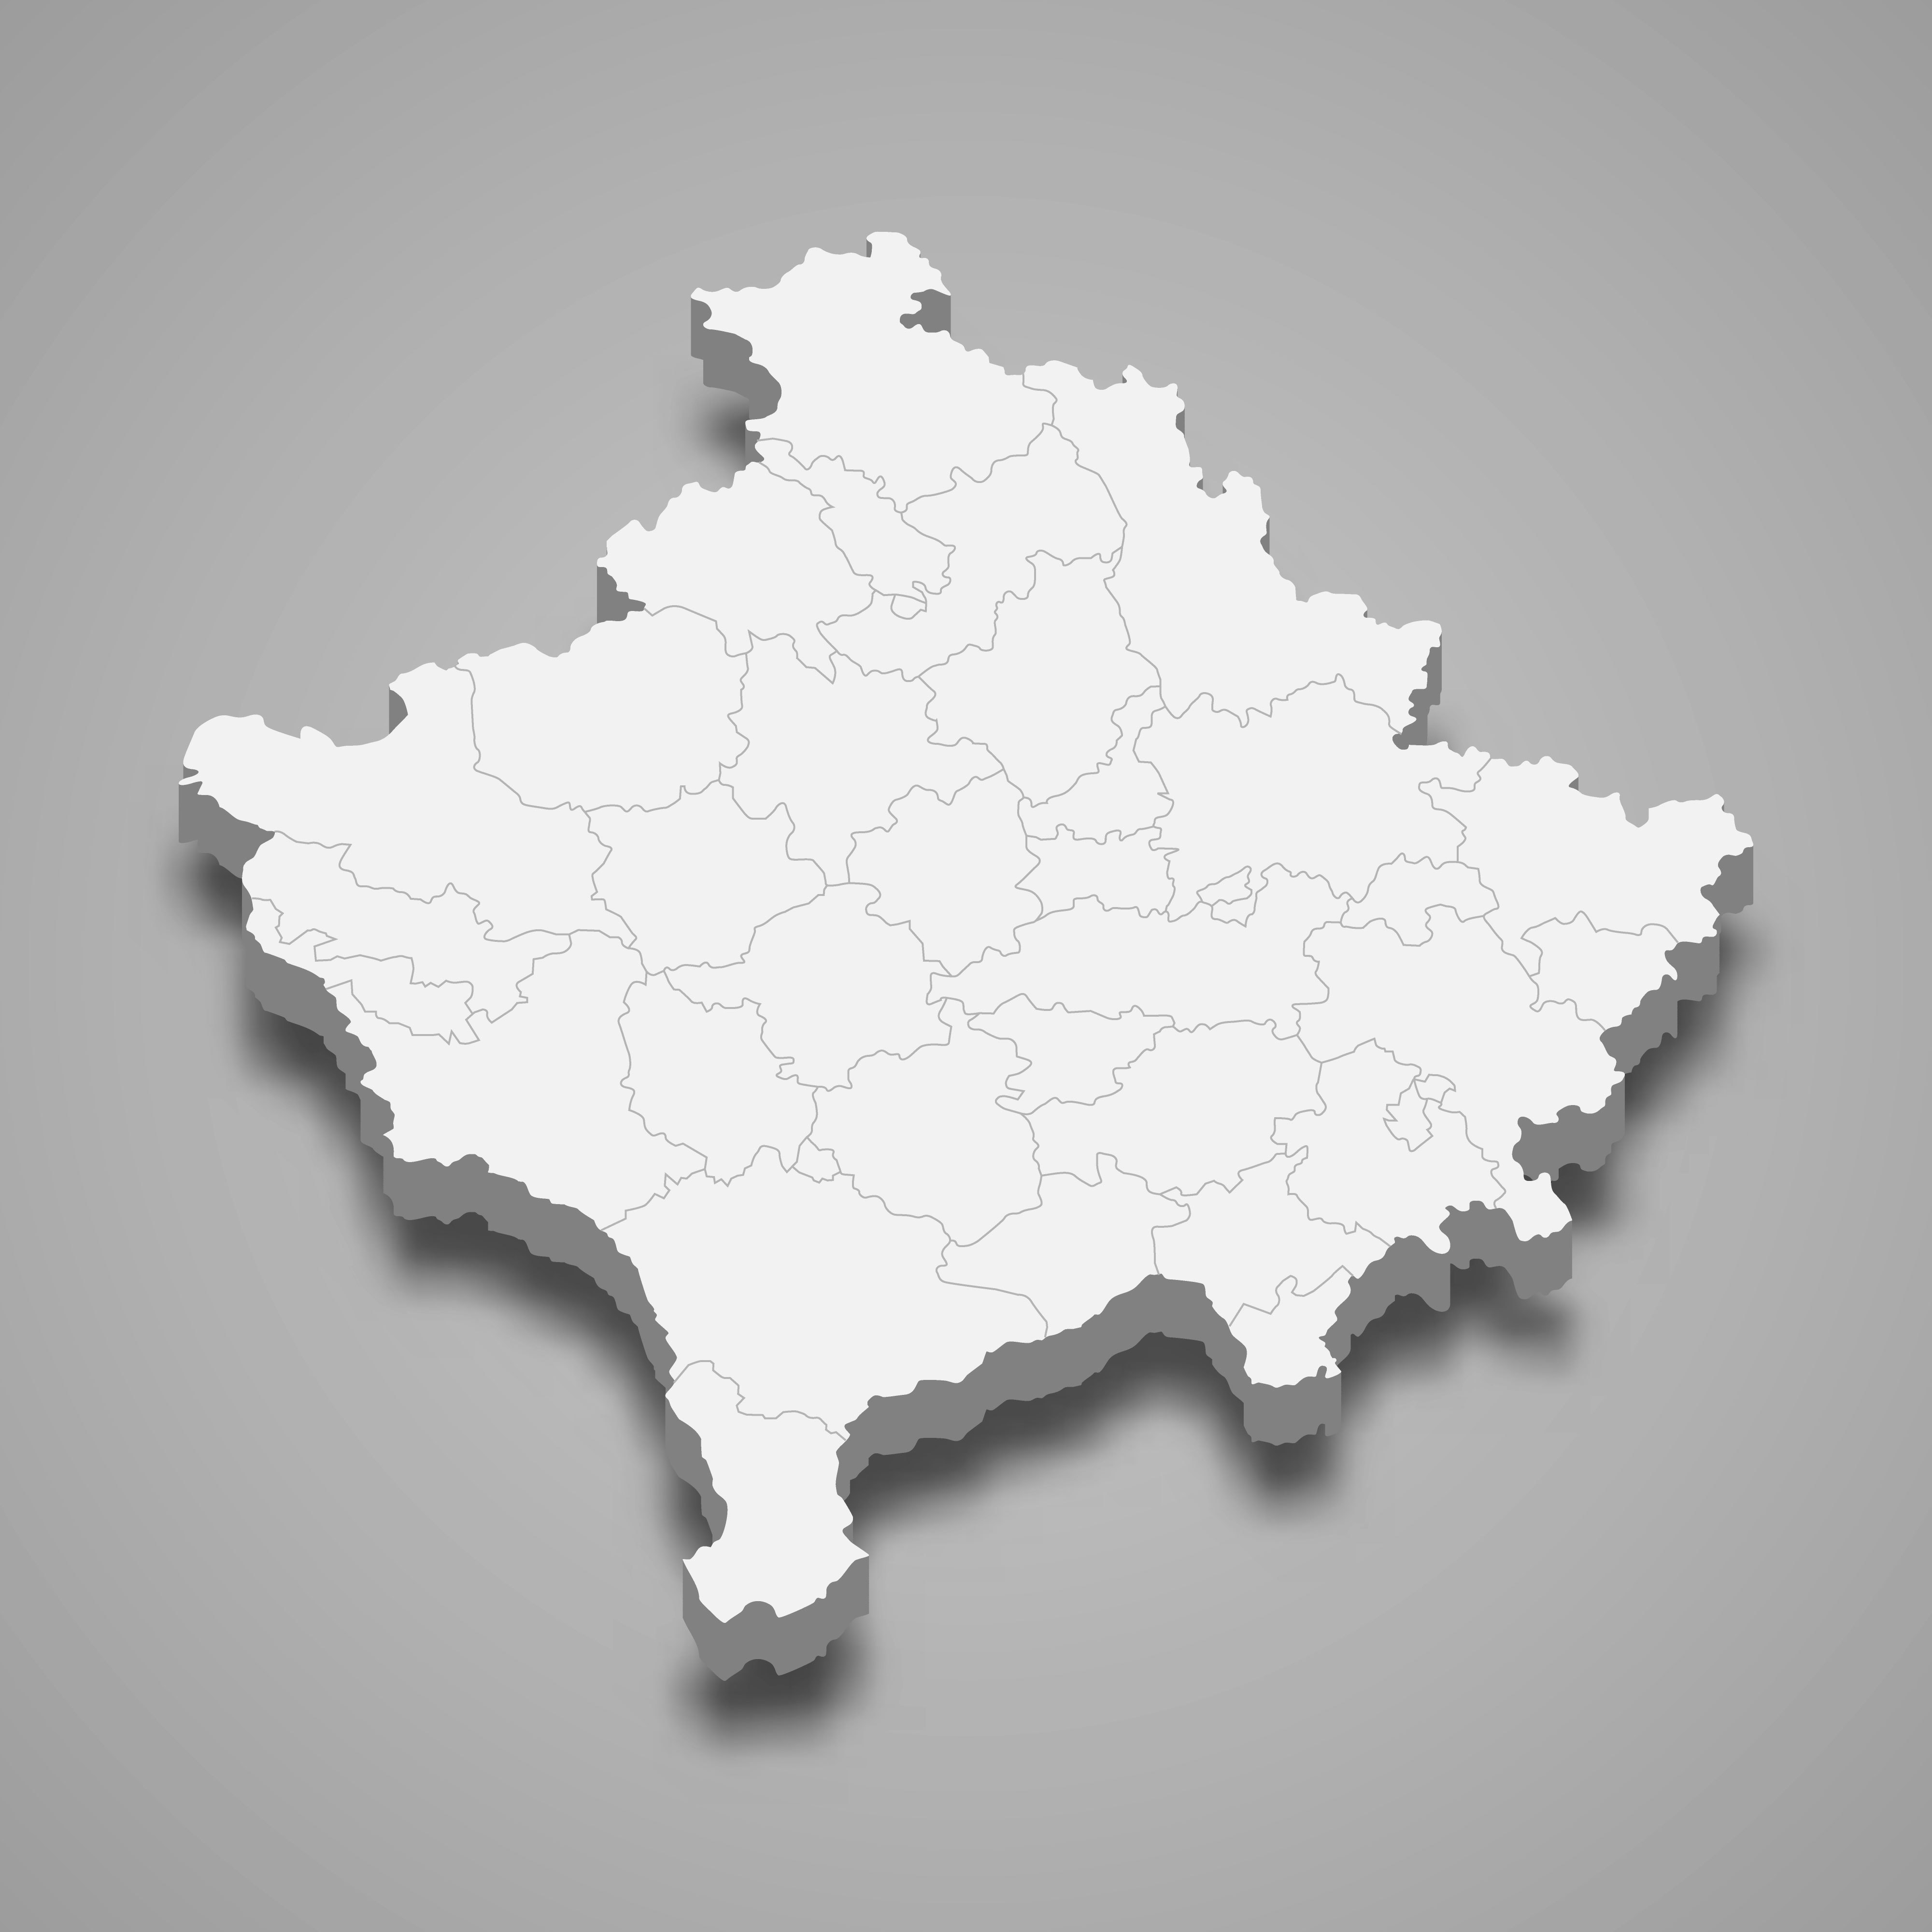 3d map of Kosovo with borders of regions. 3d map with borders Template for your design